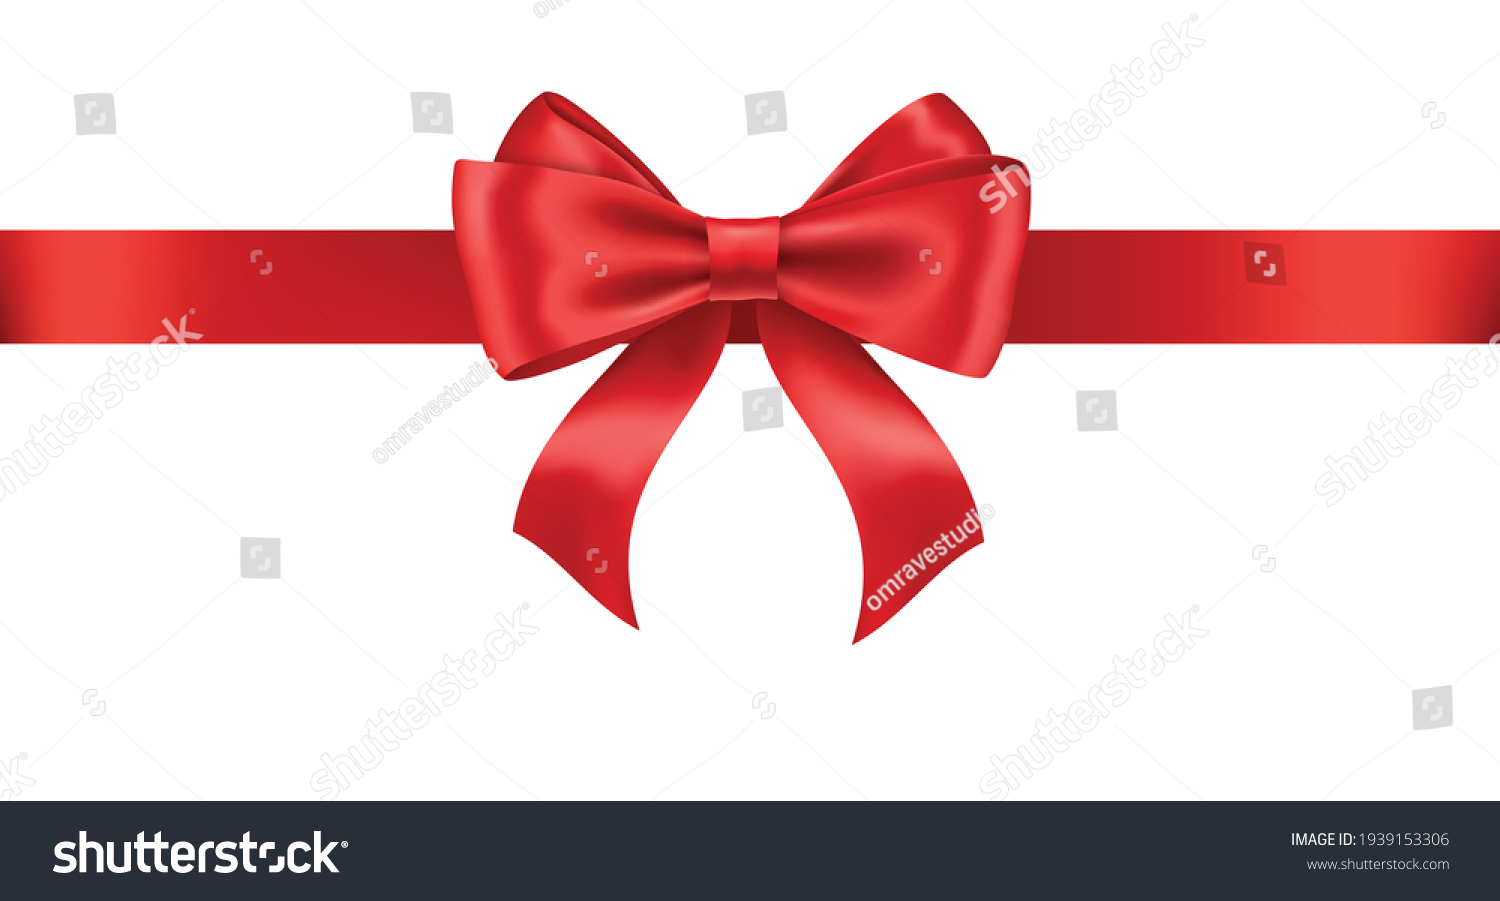 Realistic red ribbon and bow isolated on white #1939153306